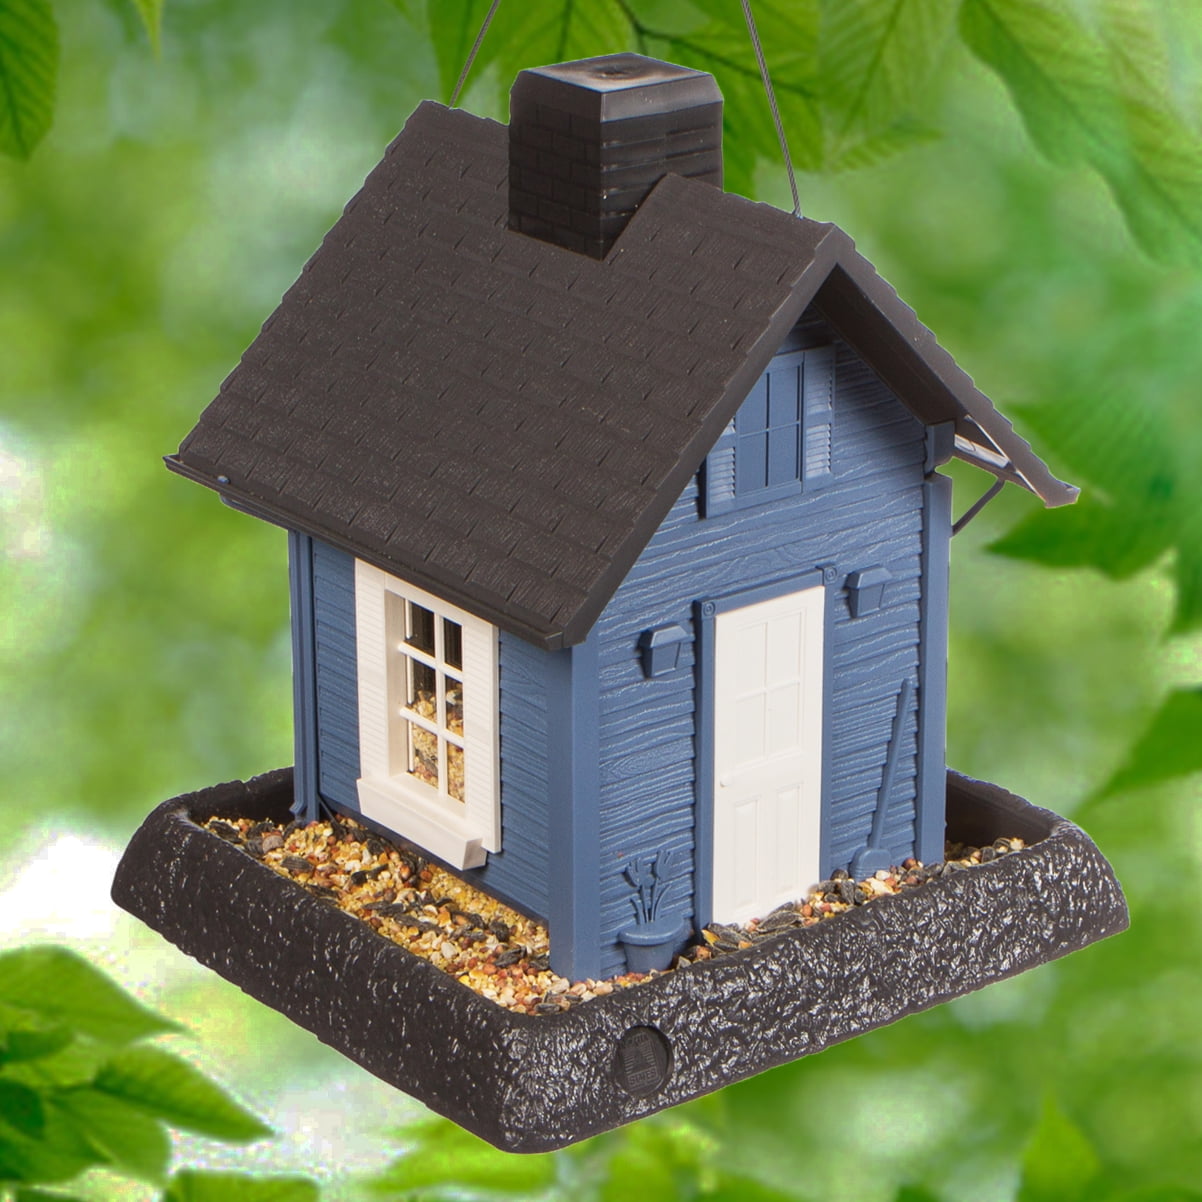 4-COMPARTMENT  BLUE & WHITE BARN BIRD HOUSE ....FREE SHIPPING 